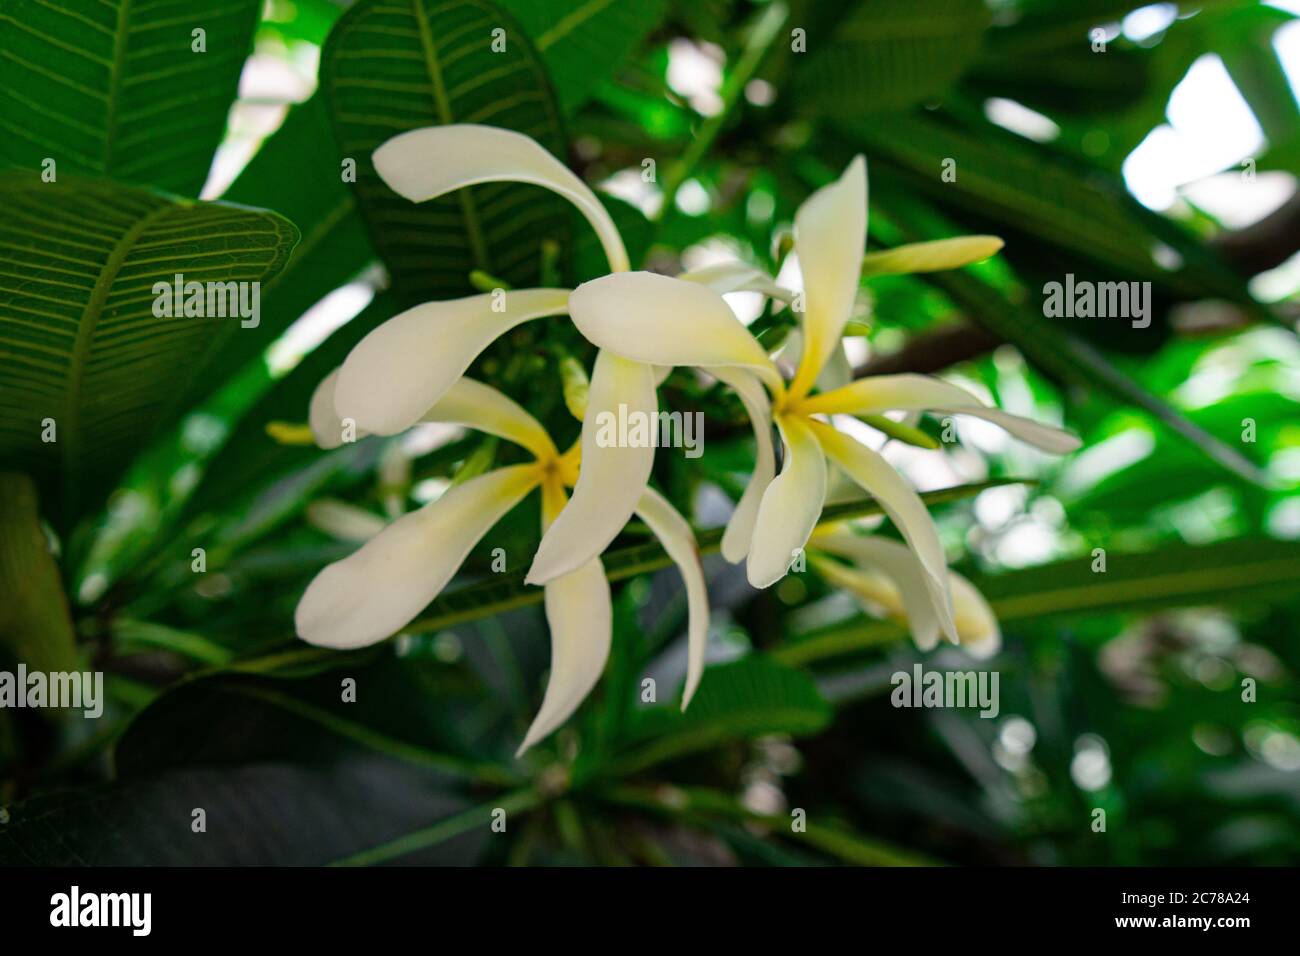 White fragrant flower with green leaves in the background. Frangipani flower is known as Plumeria flower, bouquet on branch tree in the morning. Stock Photo